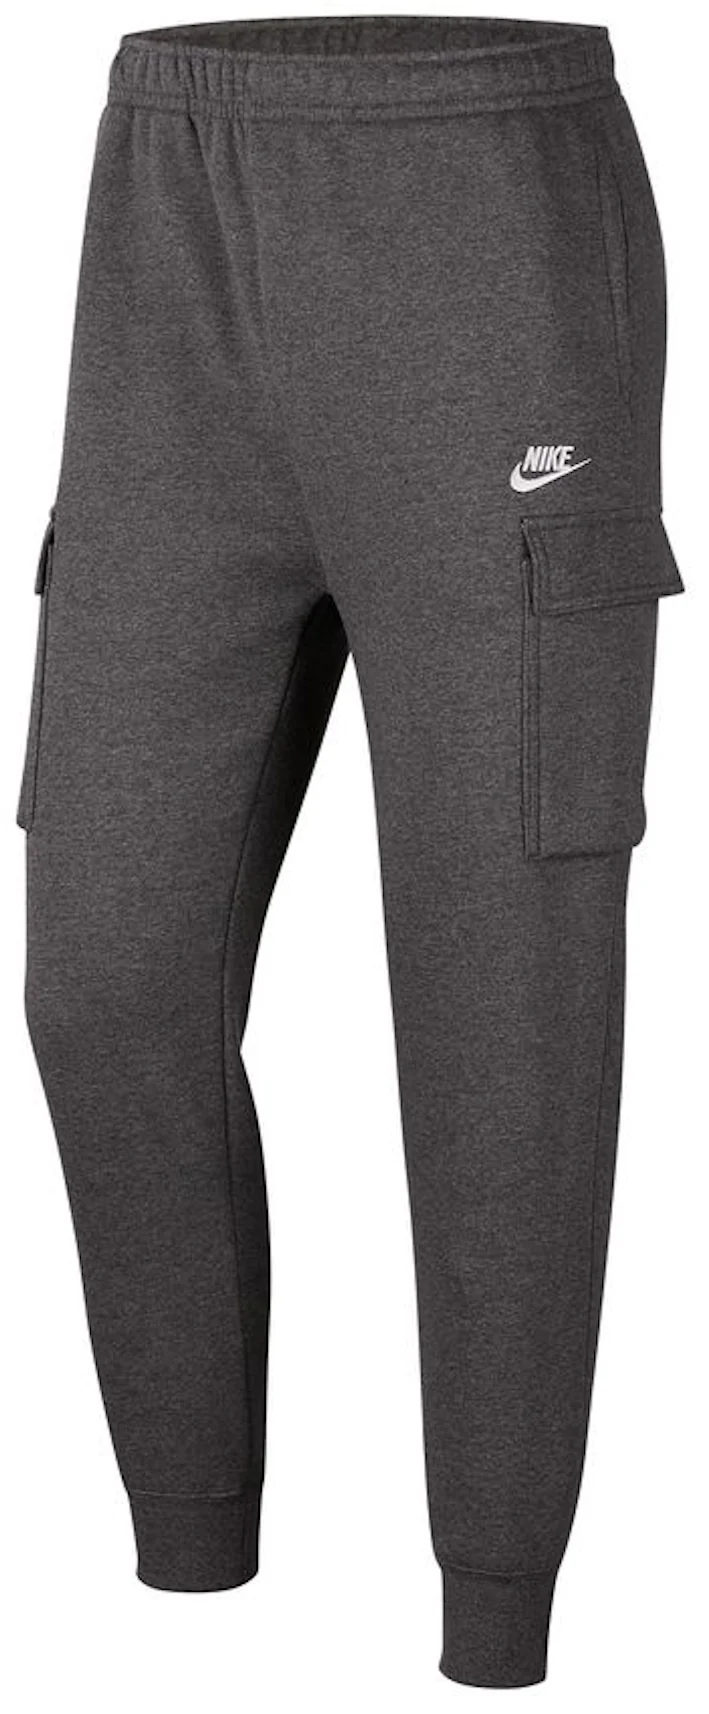 https://images.stockx.com/images/Nike-Sportswear-Club-Fleece-Cargo-Pants-Charcoal-Heather-Anthracite-White.jpg?fit=fill&bg=FFFFFF&w=1200&h=857&fm=webp&auto=compress&dpr=2&trim=color&updated_at=1664924714&q=60